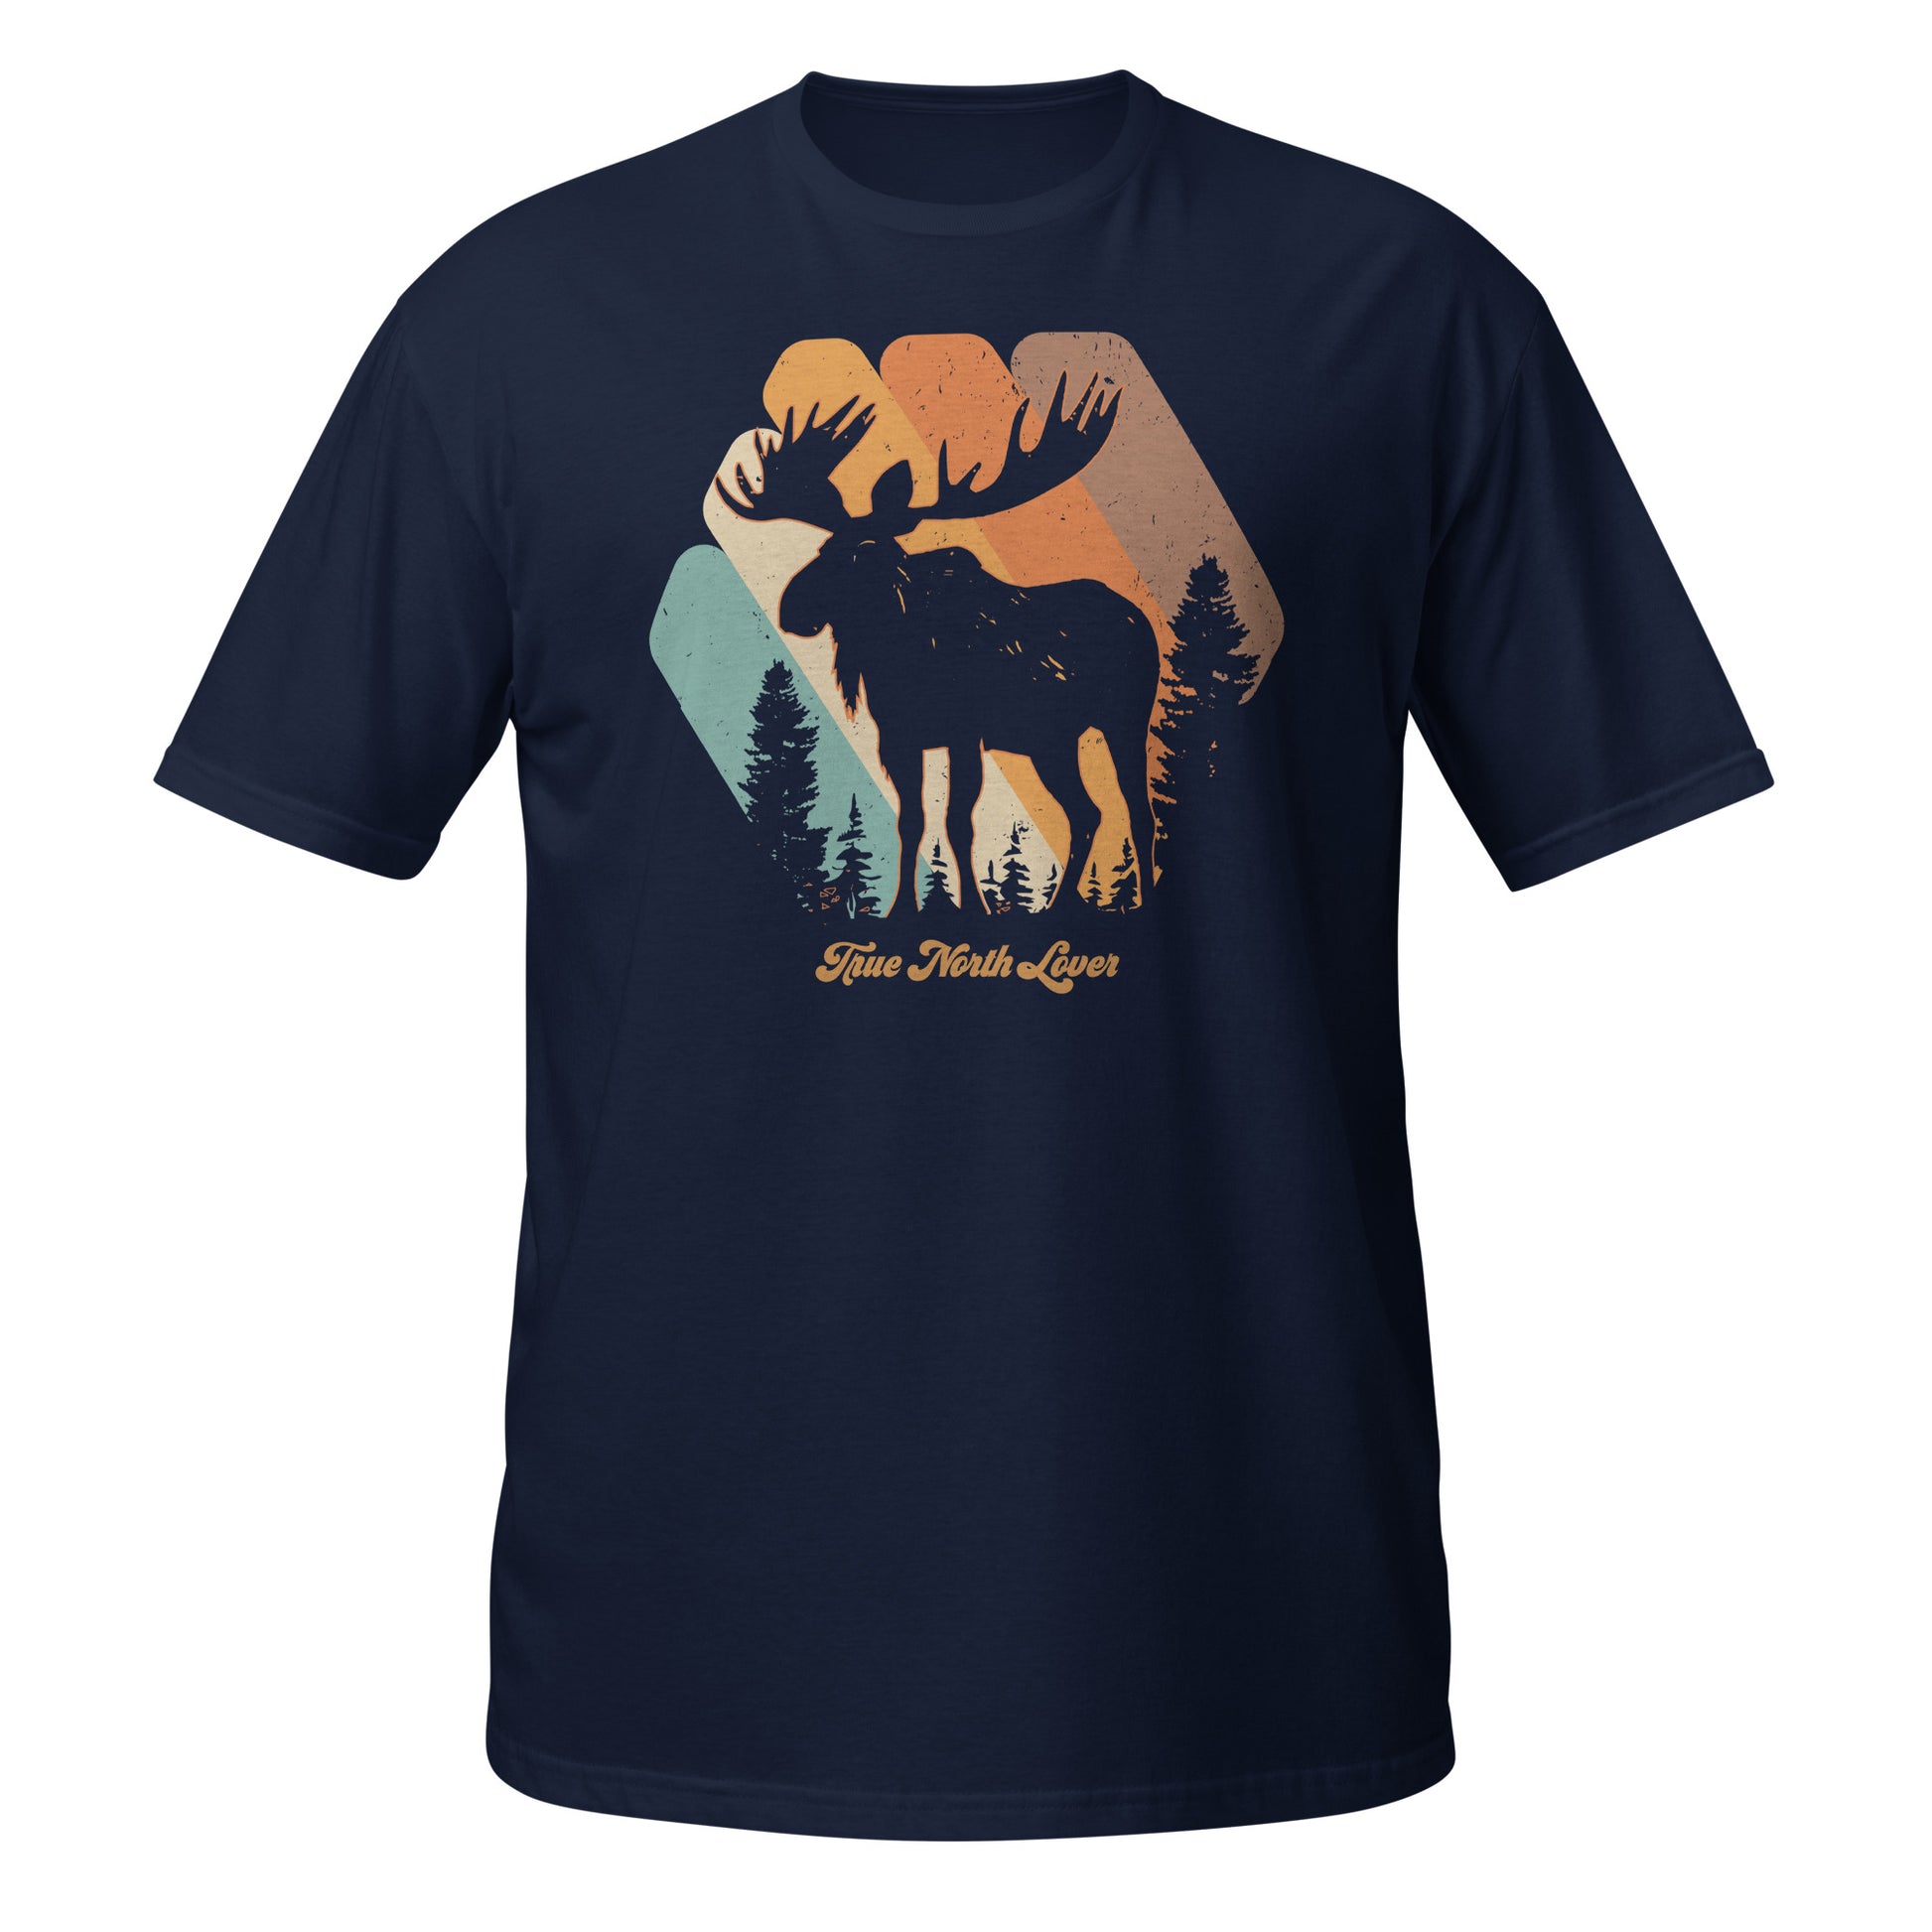 Unique Moose Graphic Tee - Stand Out as a Canada Fan